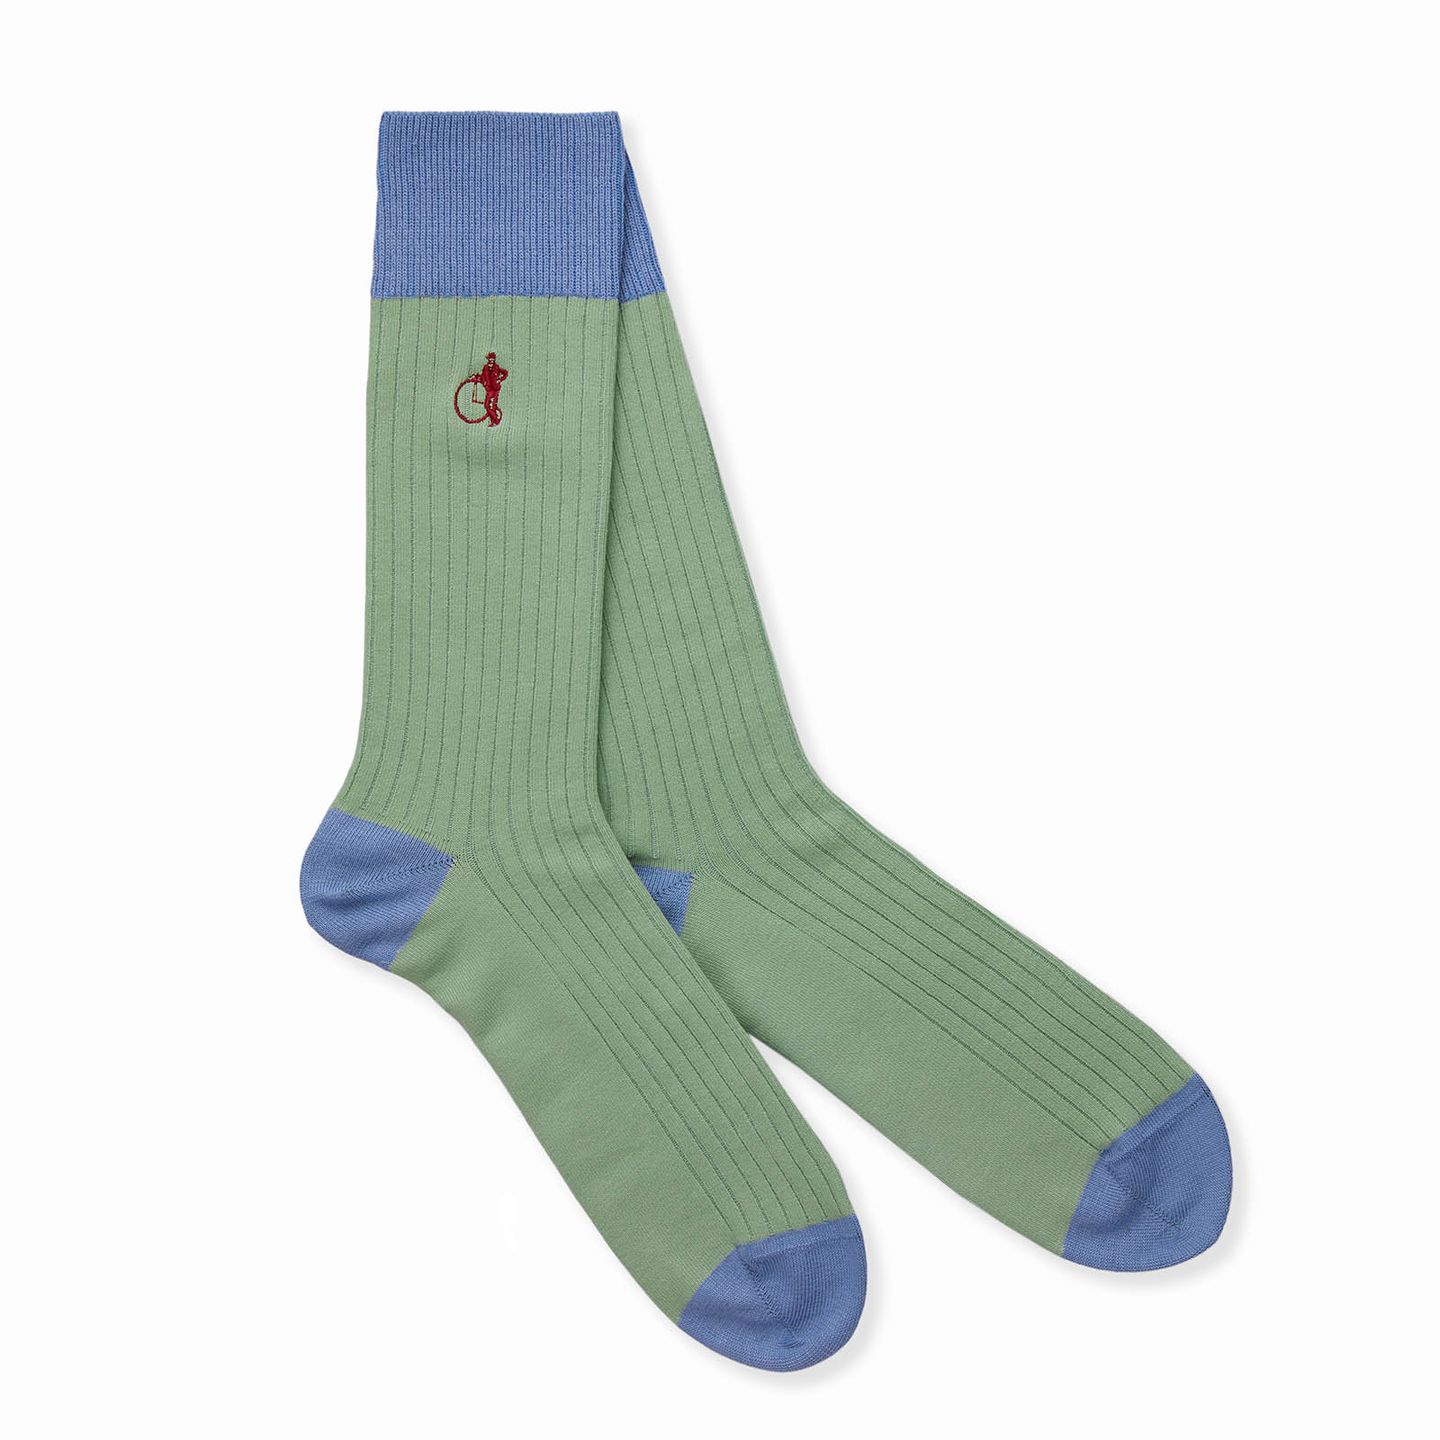 A pair of socks filled in the colours of green and blue